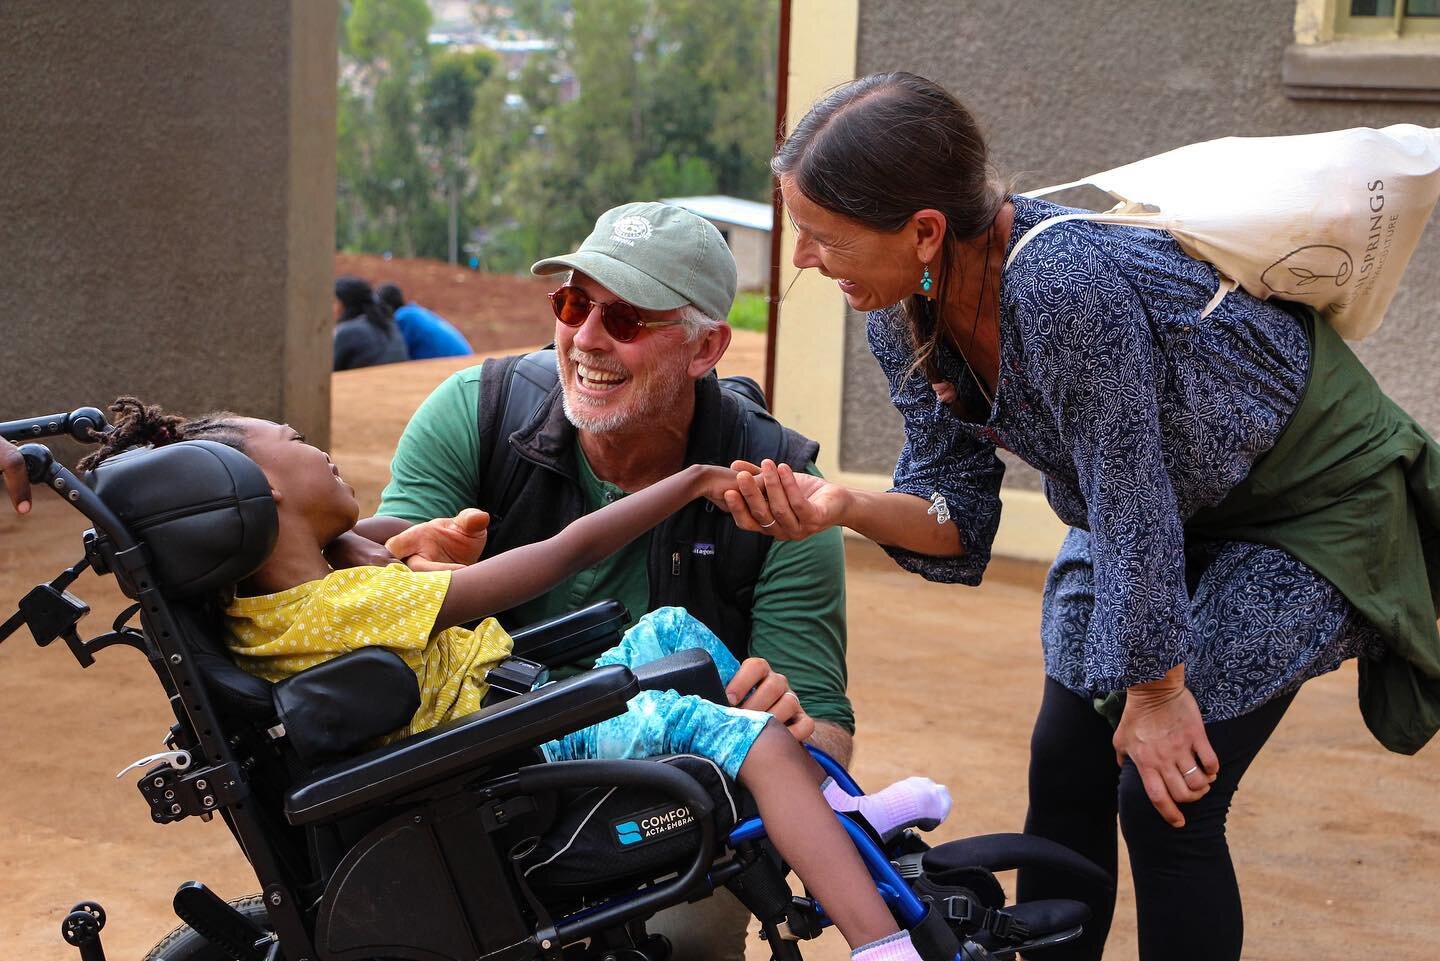 Our site plan designer, Warren Brush, makes one to two trips to Uryadi's Village a year. This year, we had the joy of his wife Cyndi joining. Warren and Cyndi truly lighten up the world wherever they go and with experience caring for children with sp